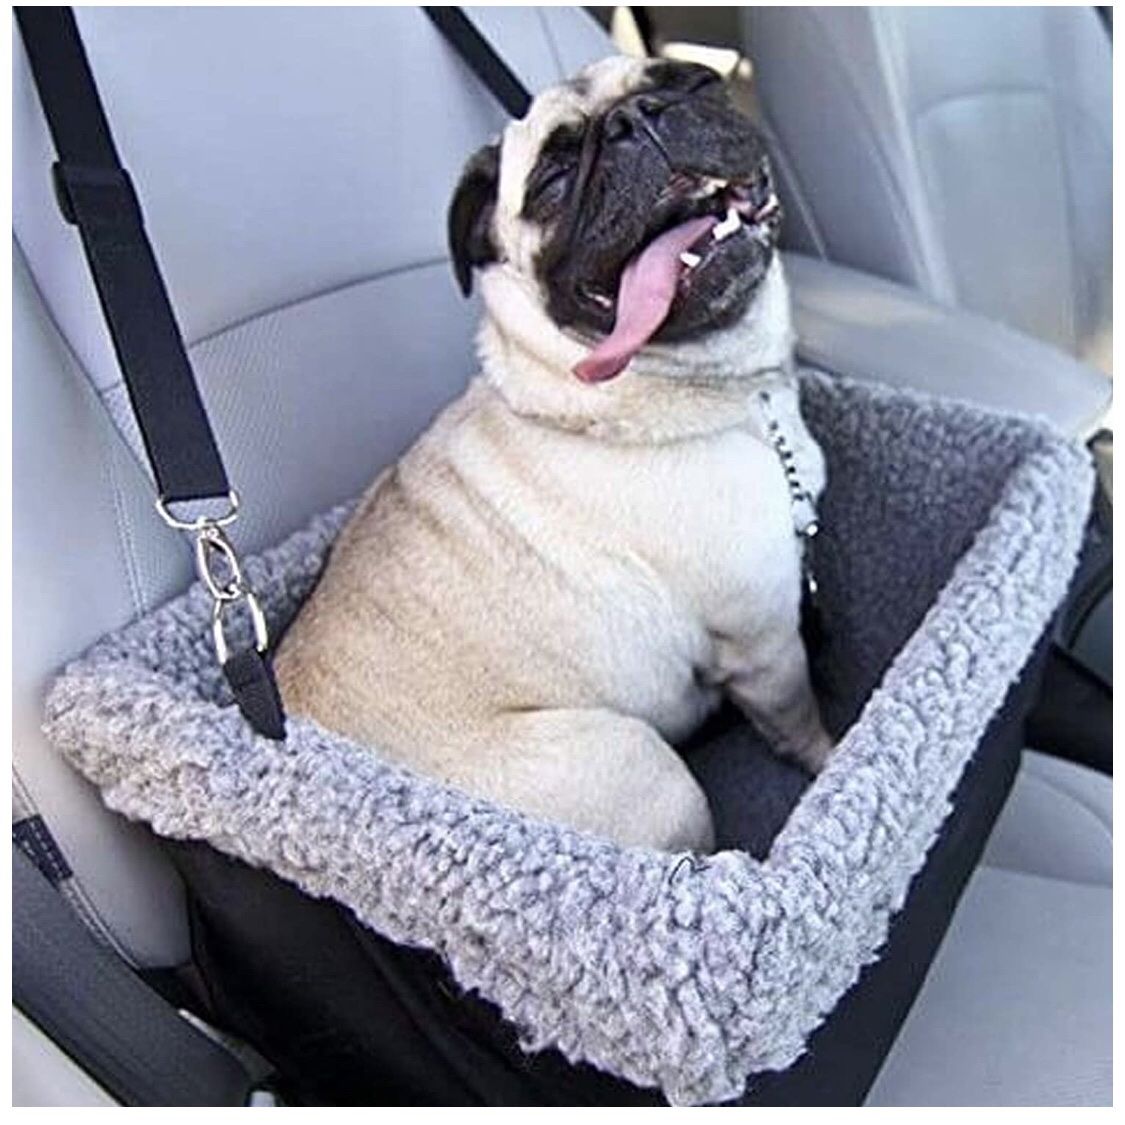 Dog Booster Car Seat for Pets Up to 15 Lbs